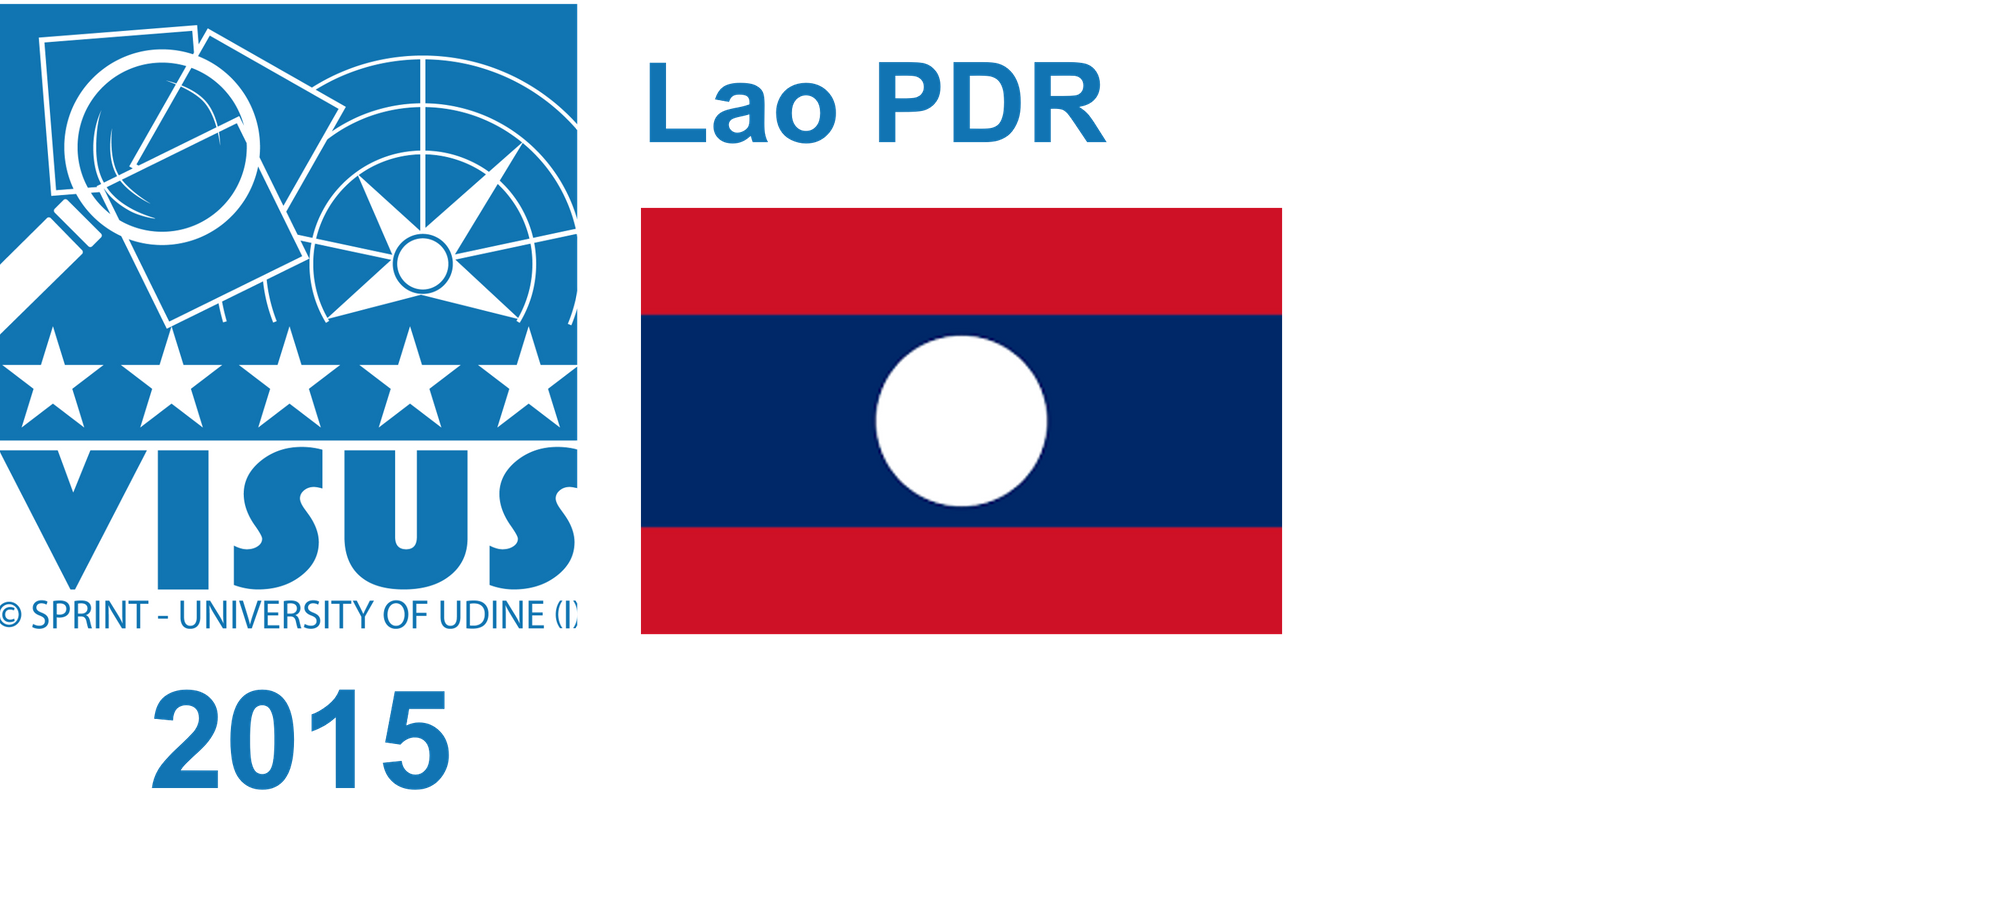 Lao PDR, 2015